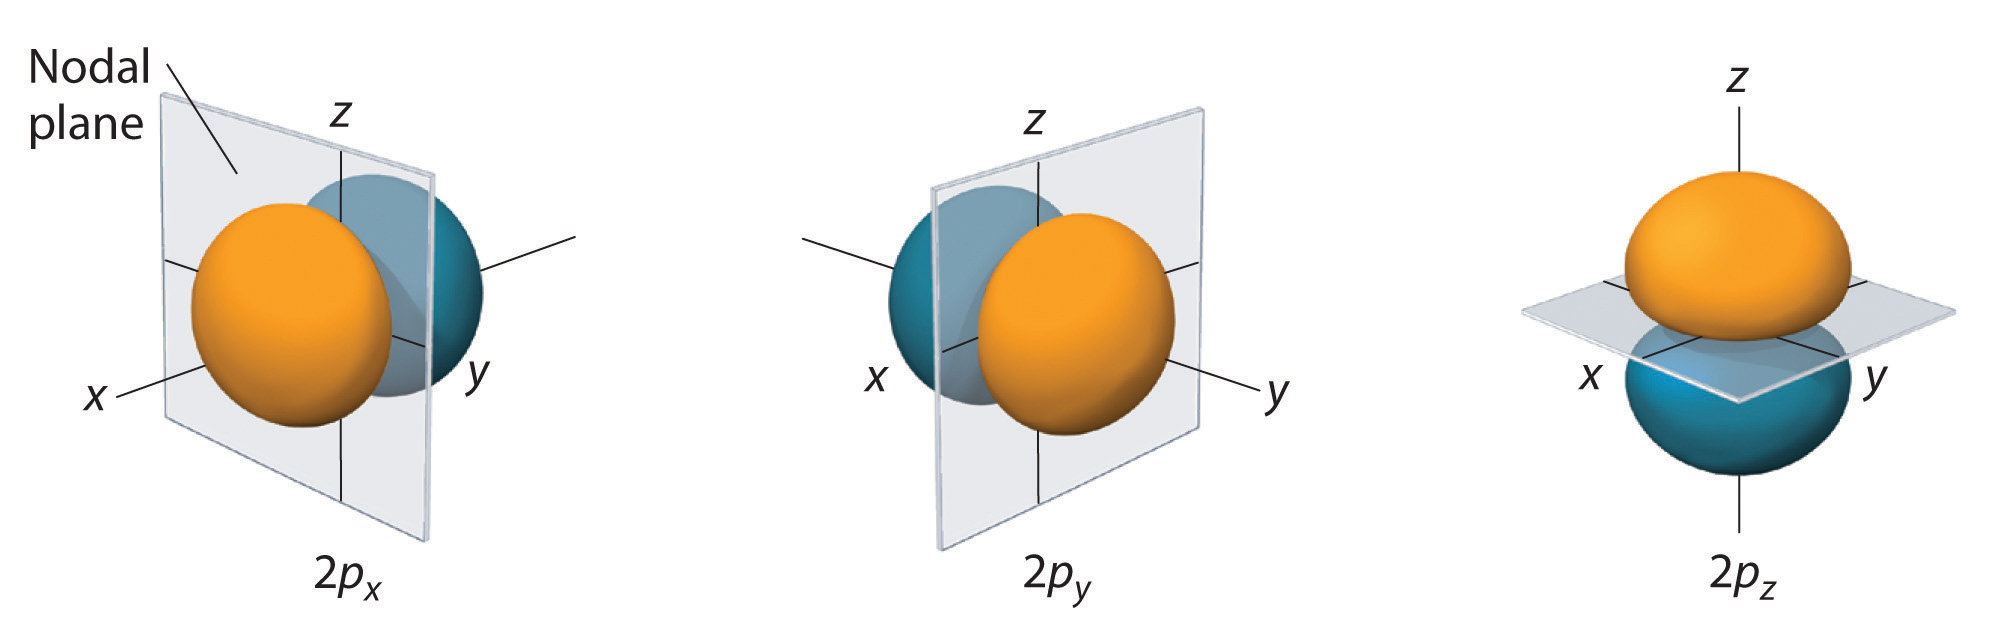 The 2 p orbitals can be broken down into 2 p x, 2 p y, and 2 p z.